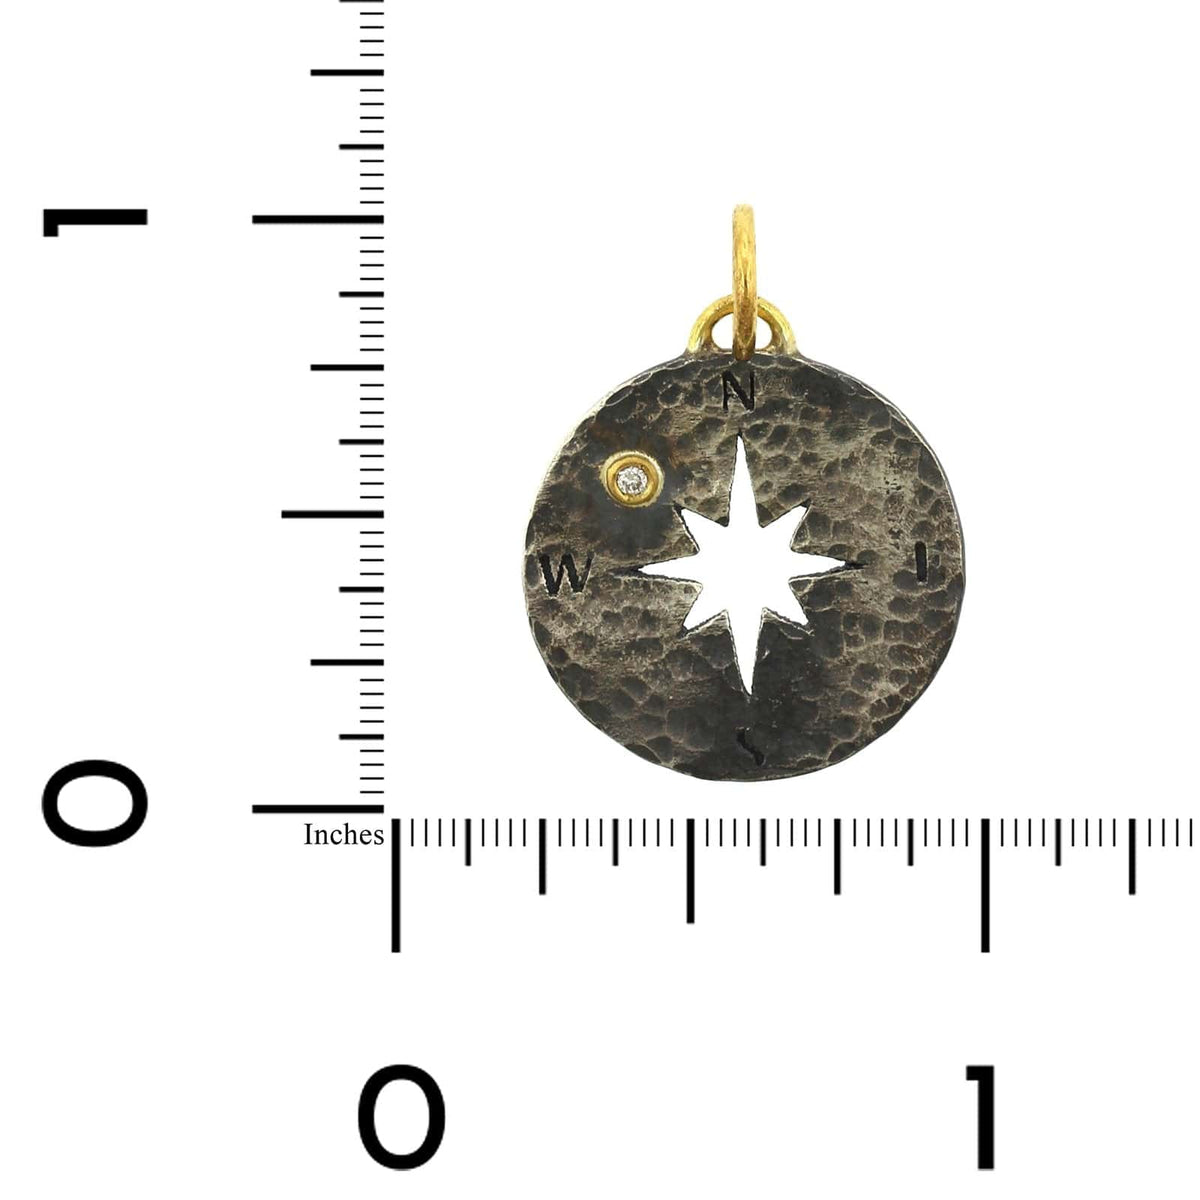 Sterling Silver and 24K Yellow Gold Compass Charm